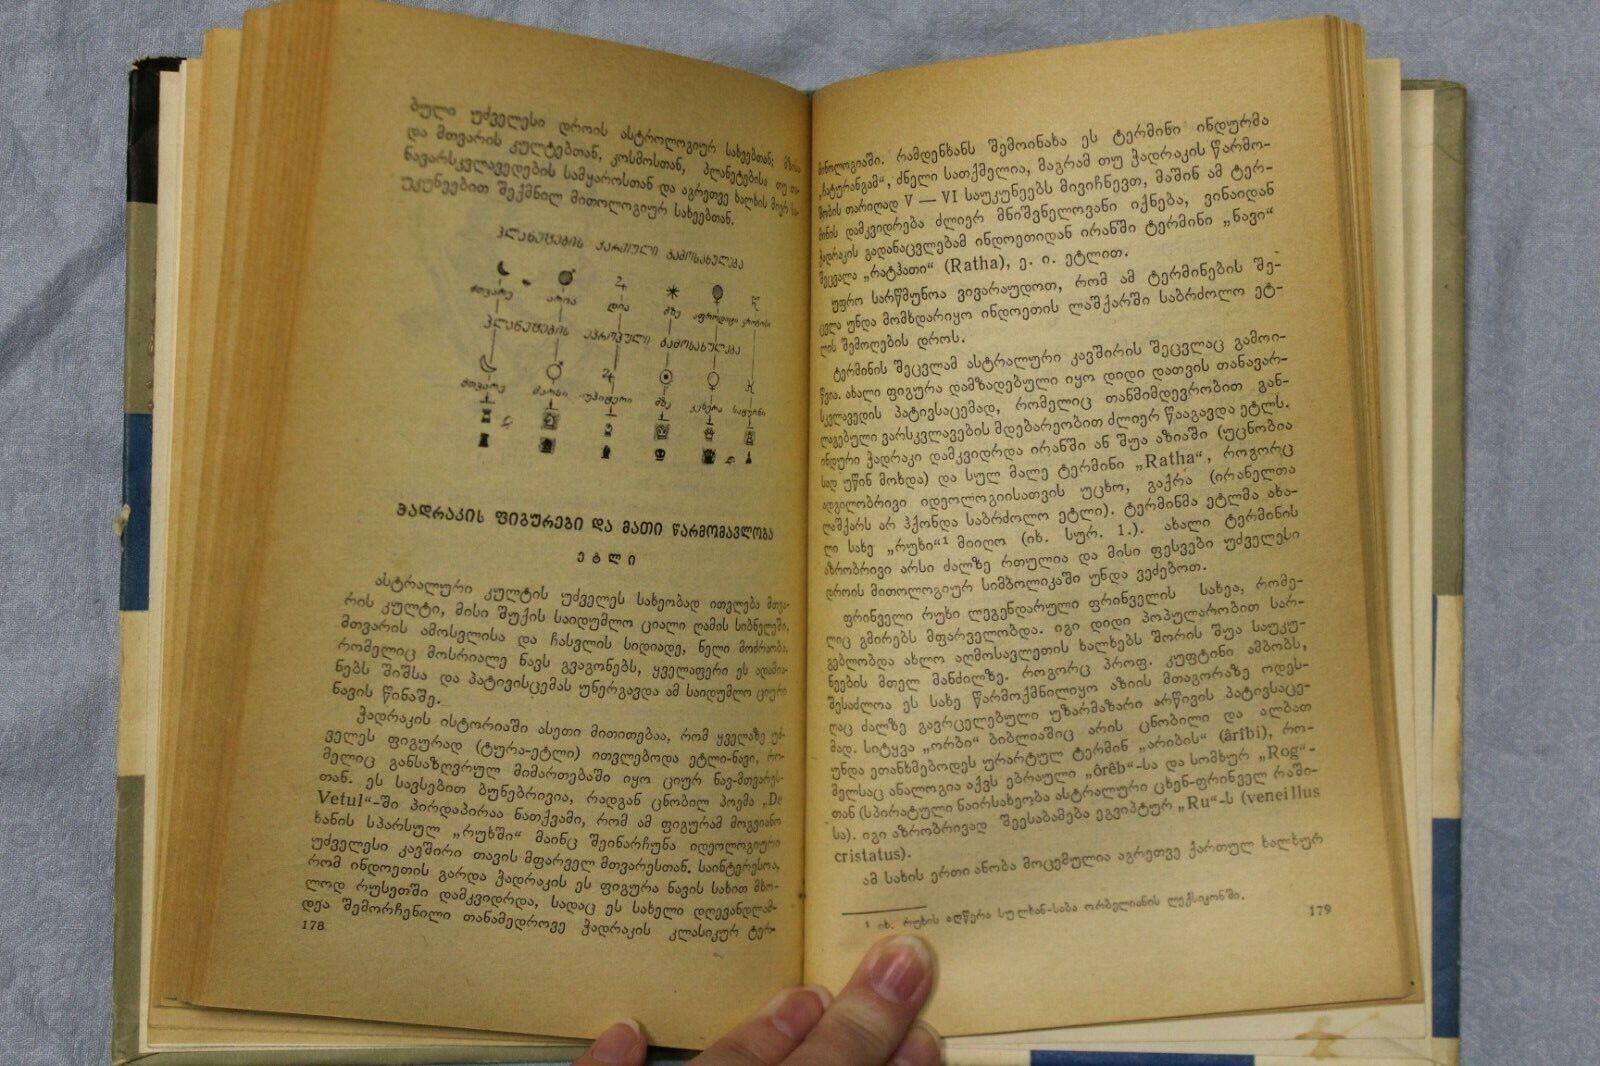 11126.Chess book: signed Vadbolsky to wife & Saratov club. Chess for 1400 years. 1972